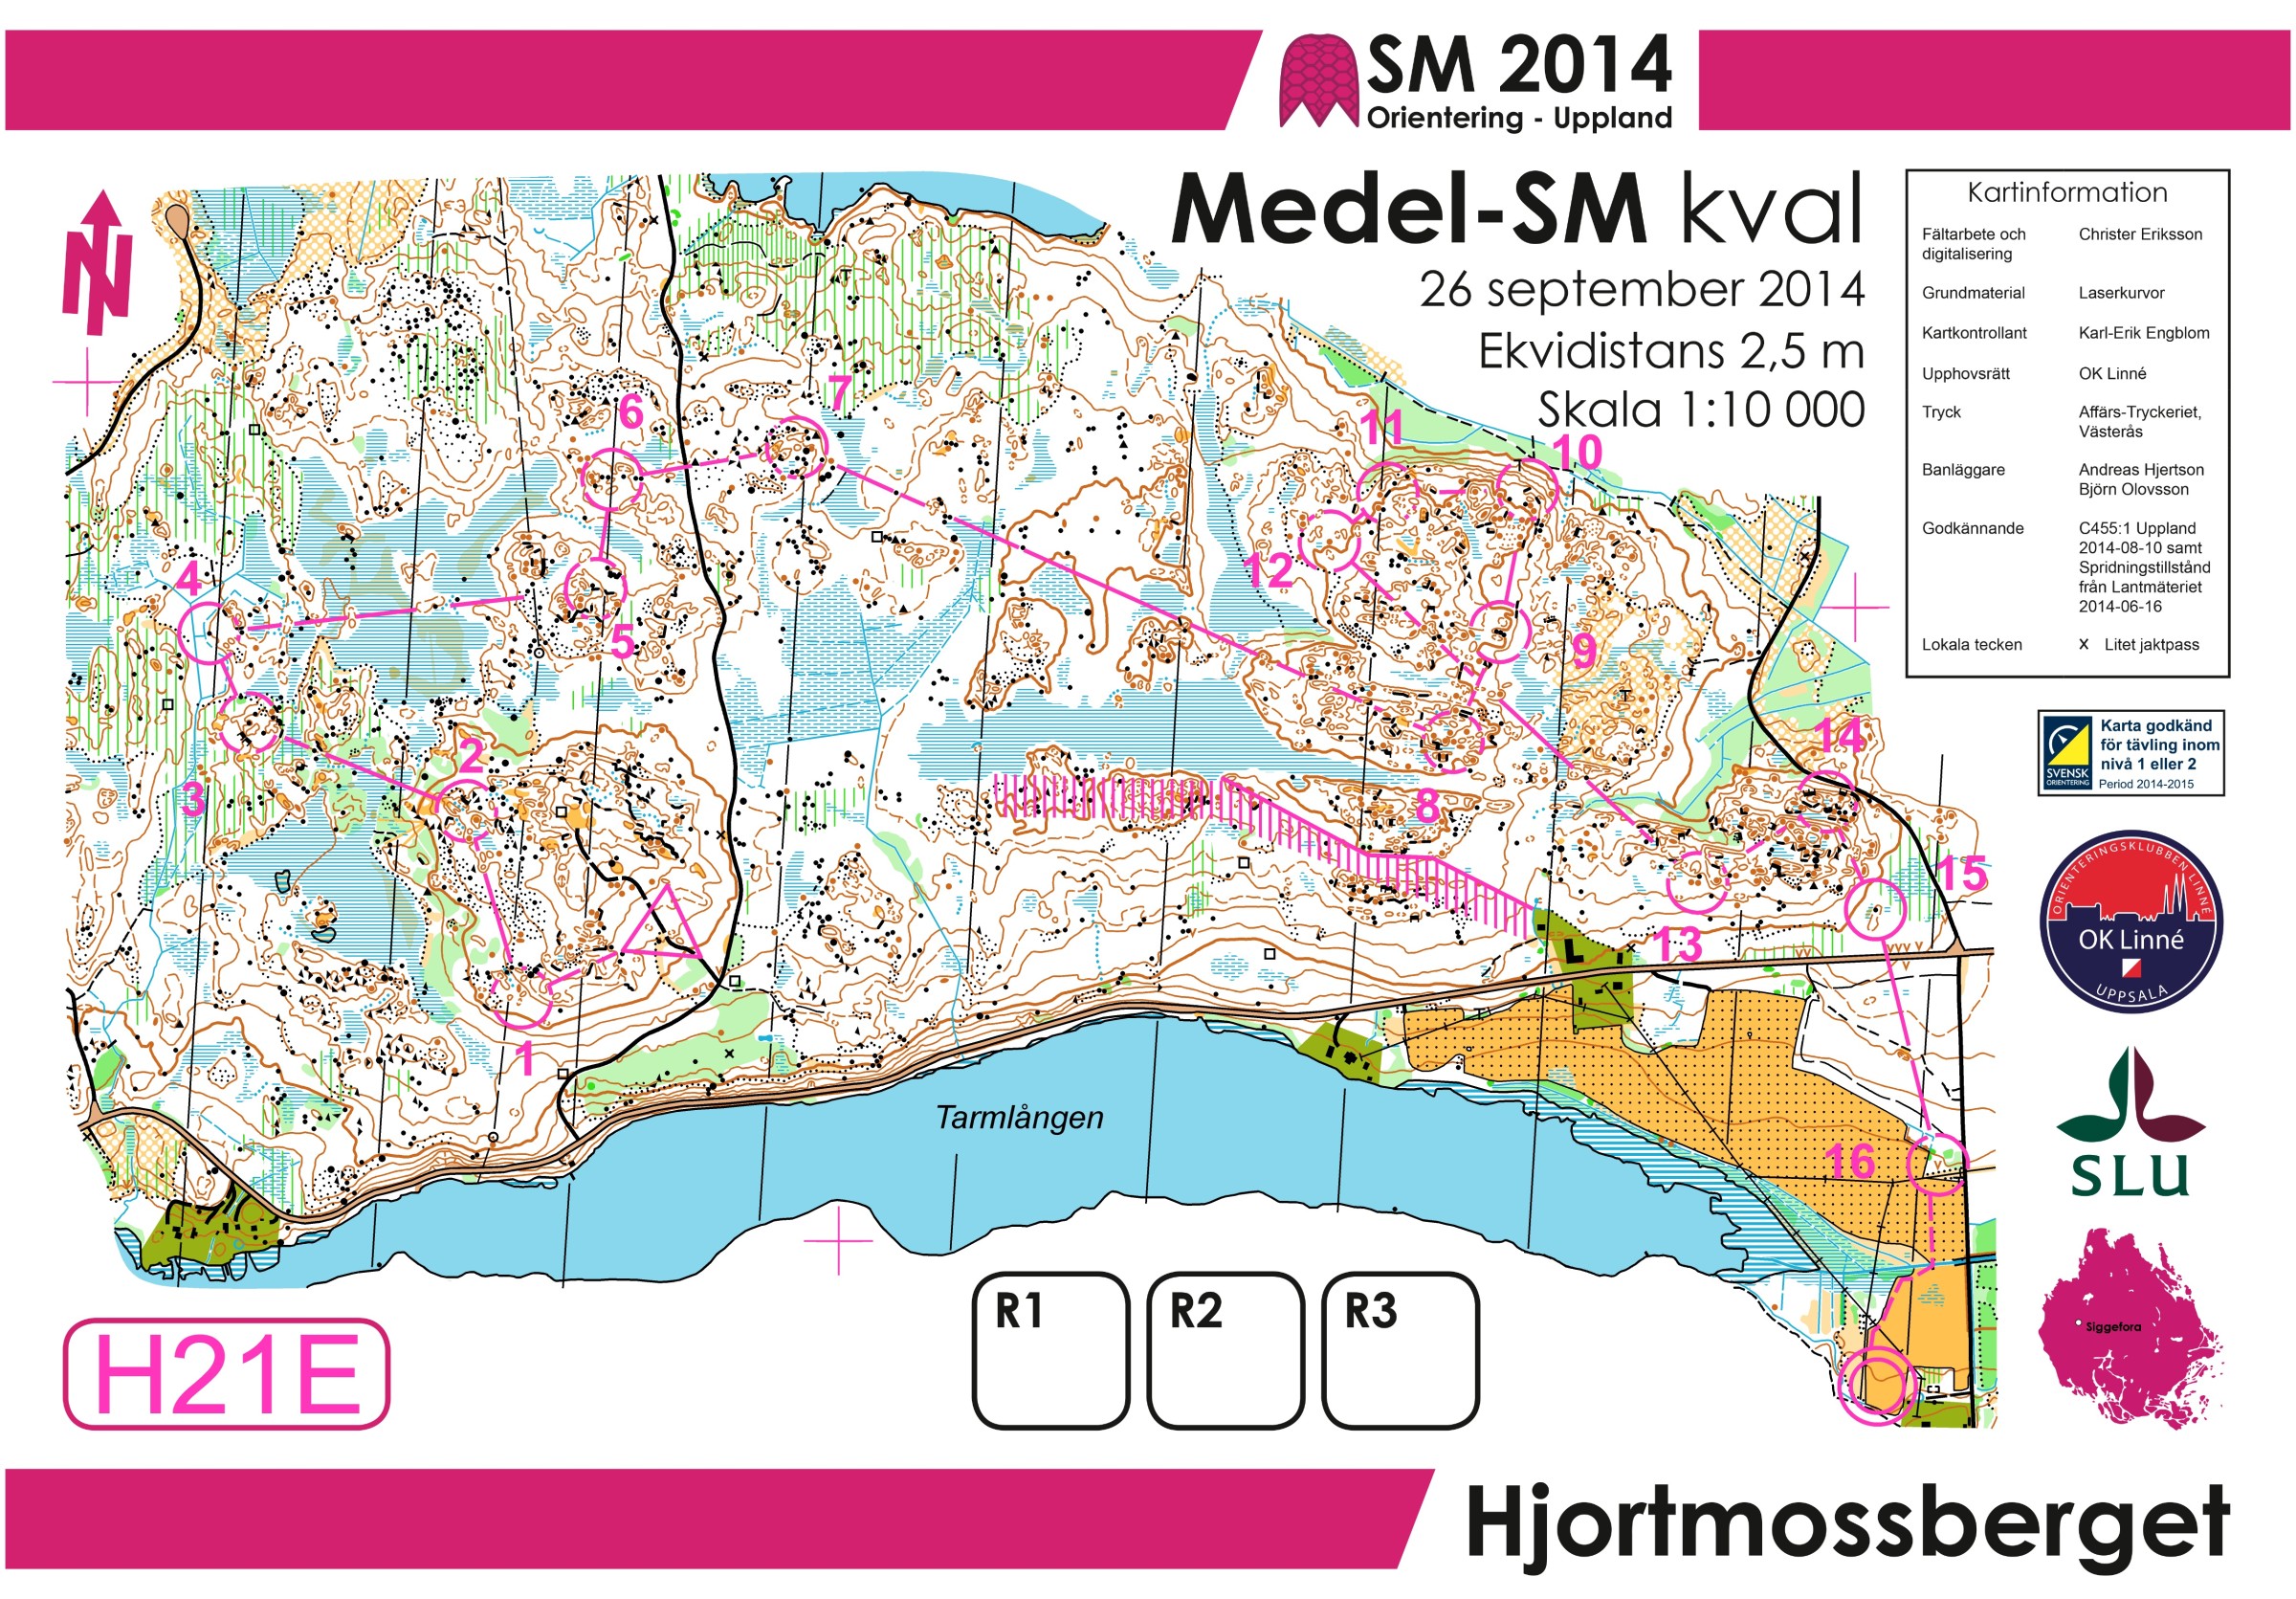 SM Middle qualification (26-09-2014)